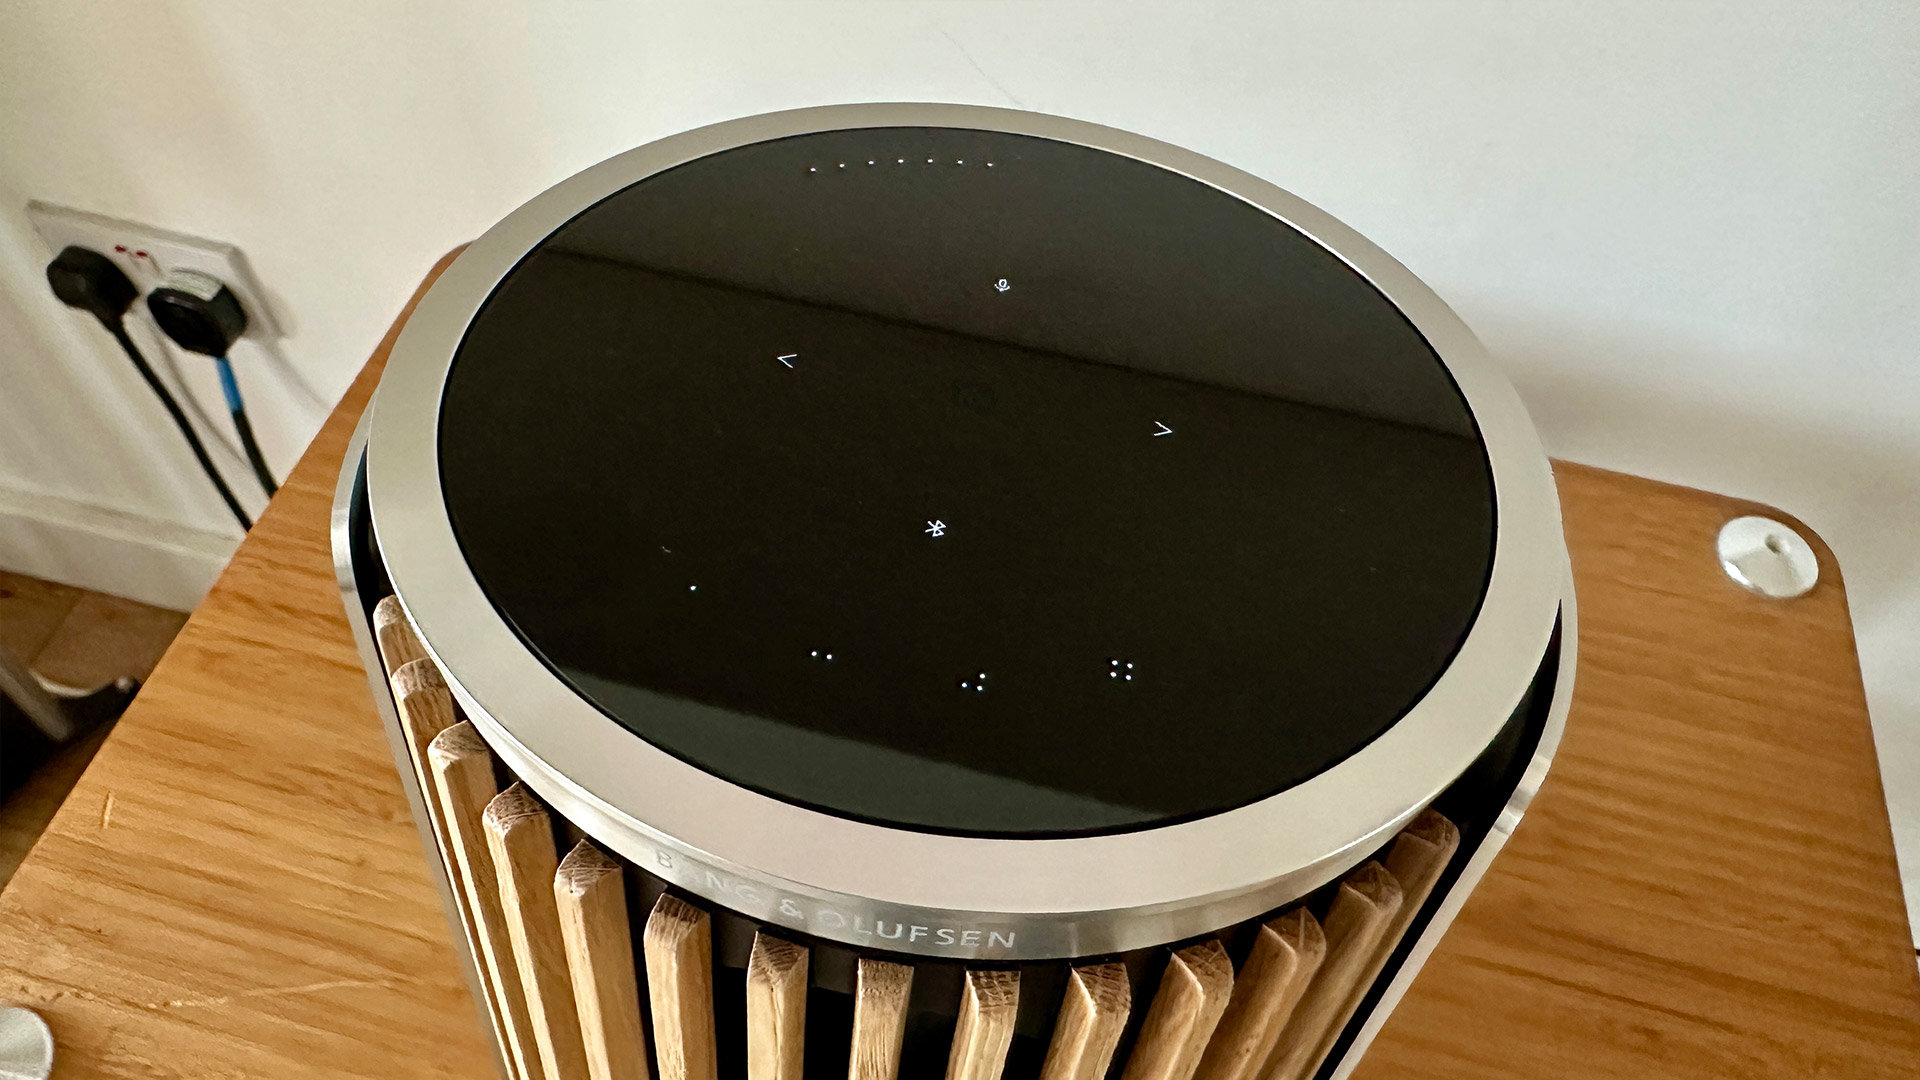 Bang & Olufsen Beolab 8 from above